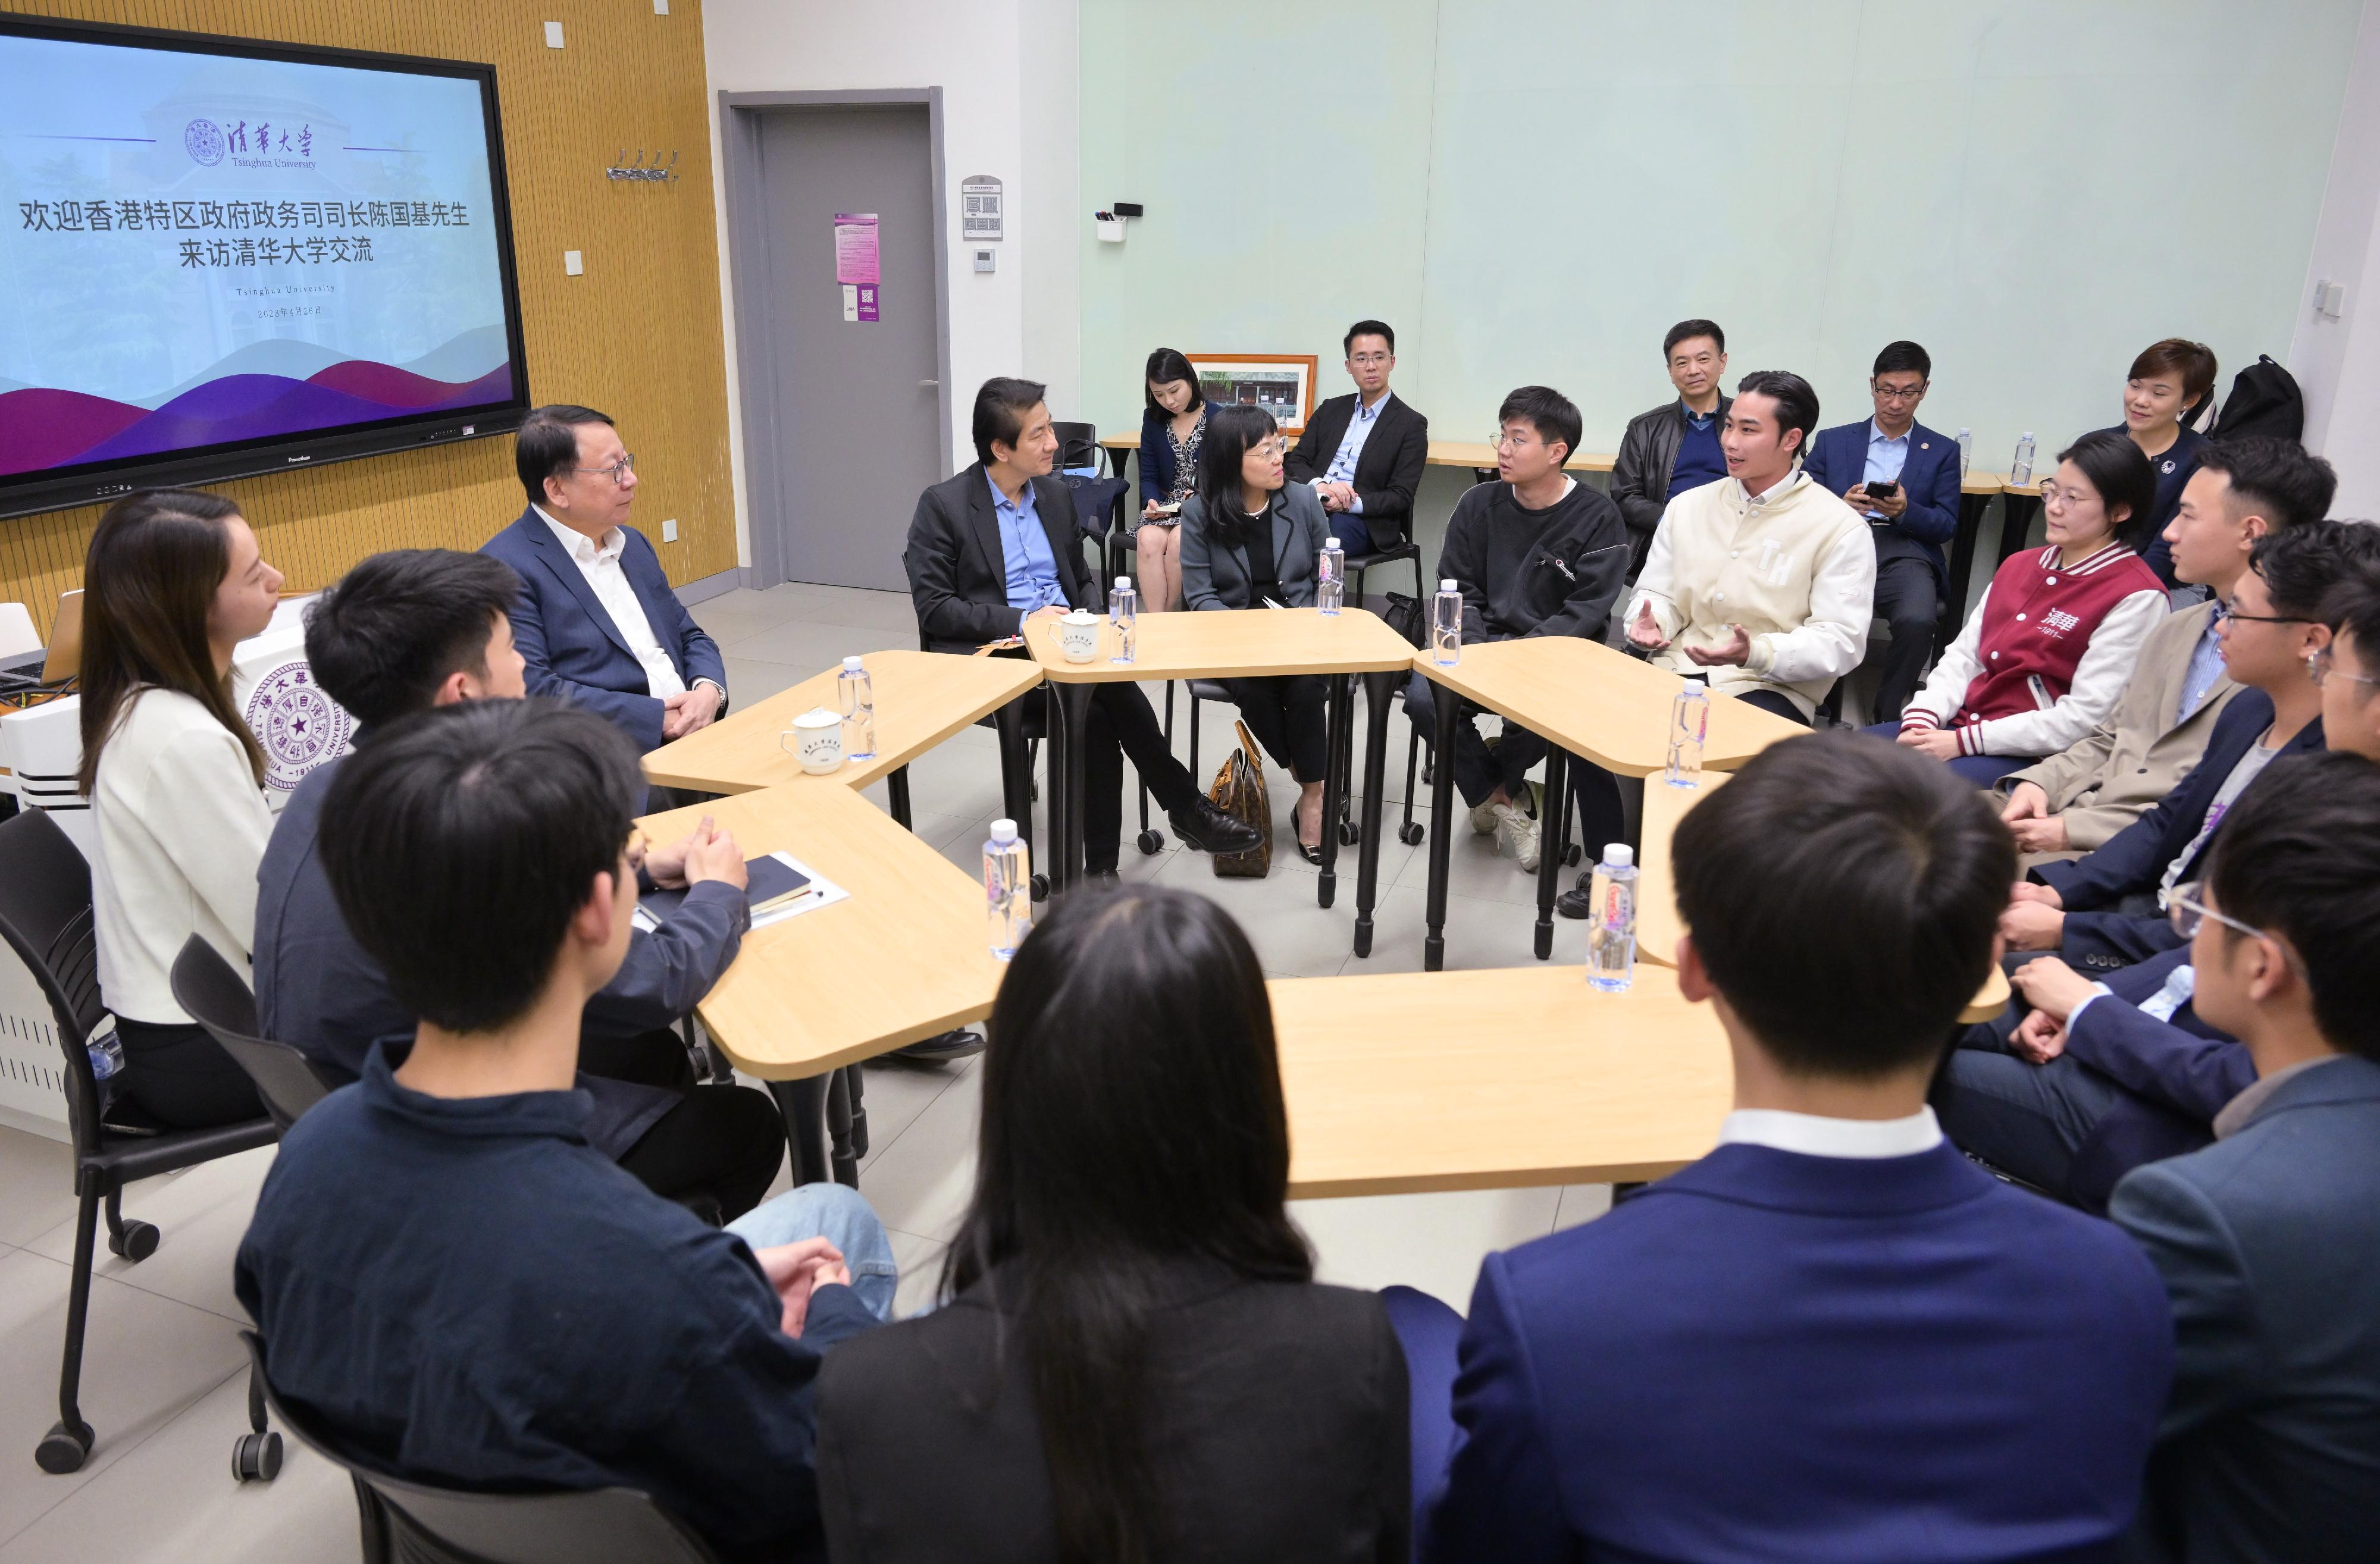 The Chief Secretary for Administration, Mr Chan Kwok-ki, began his visit in Beijing today (April 26). Photo shows Mr Chan (first left), accompanied by the Director of the Office of the Government of the Hong Kong Special Administrative Region in Beijing, Mr Rex Chang (second left), meeting with Hong Kong students studying at Tsinghua University in Beijing today (April 26).